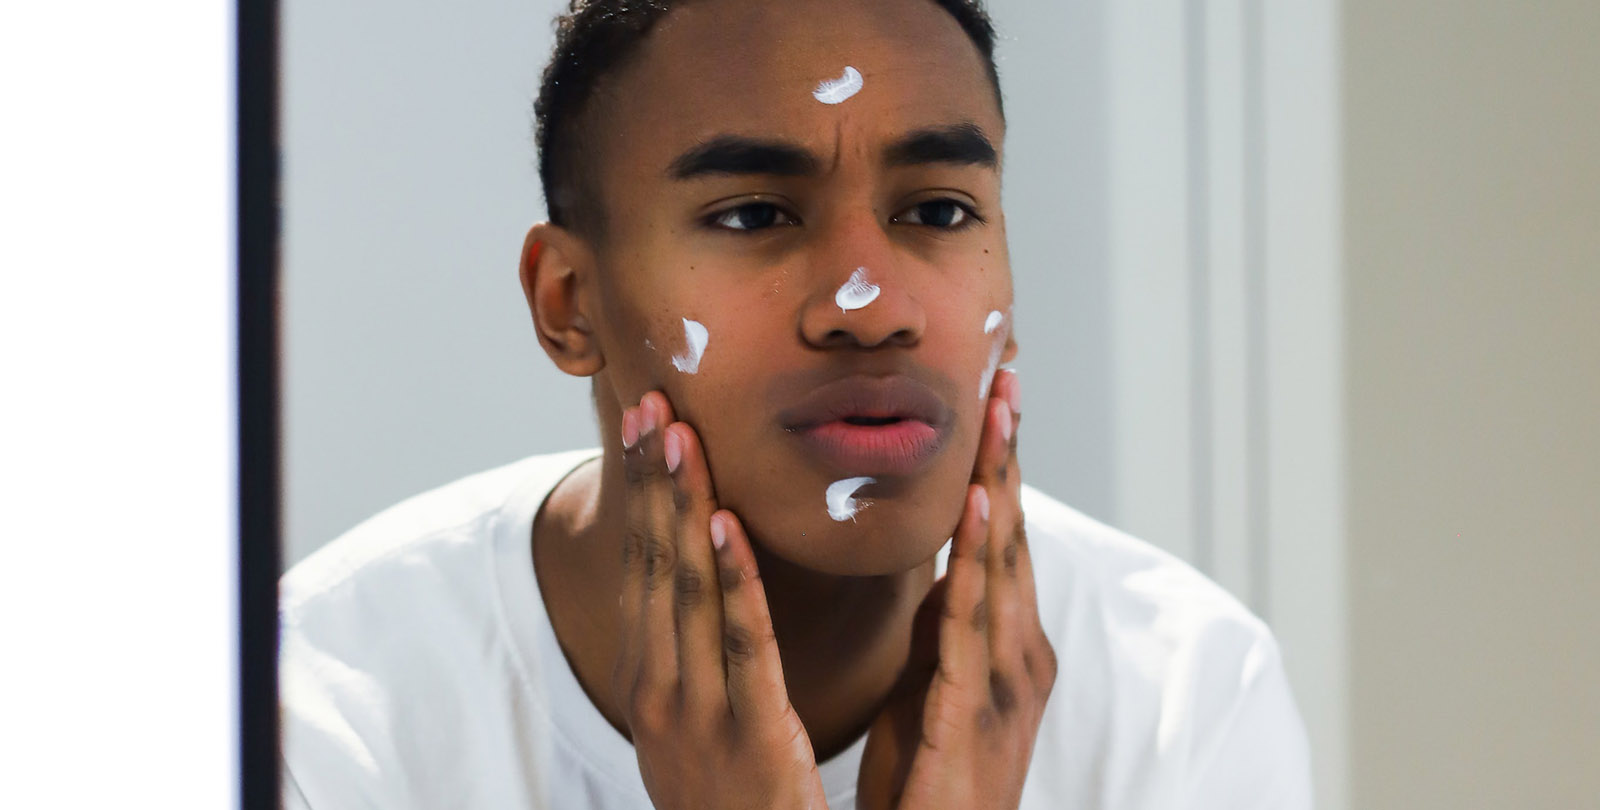 Skincare For Men At All Age: Level Up Your Skincare Game With Best Skincare Tips